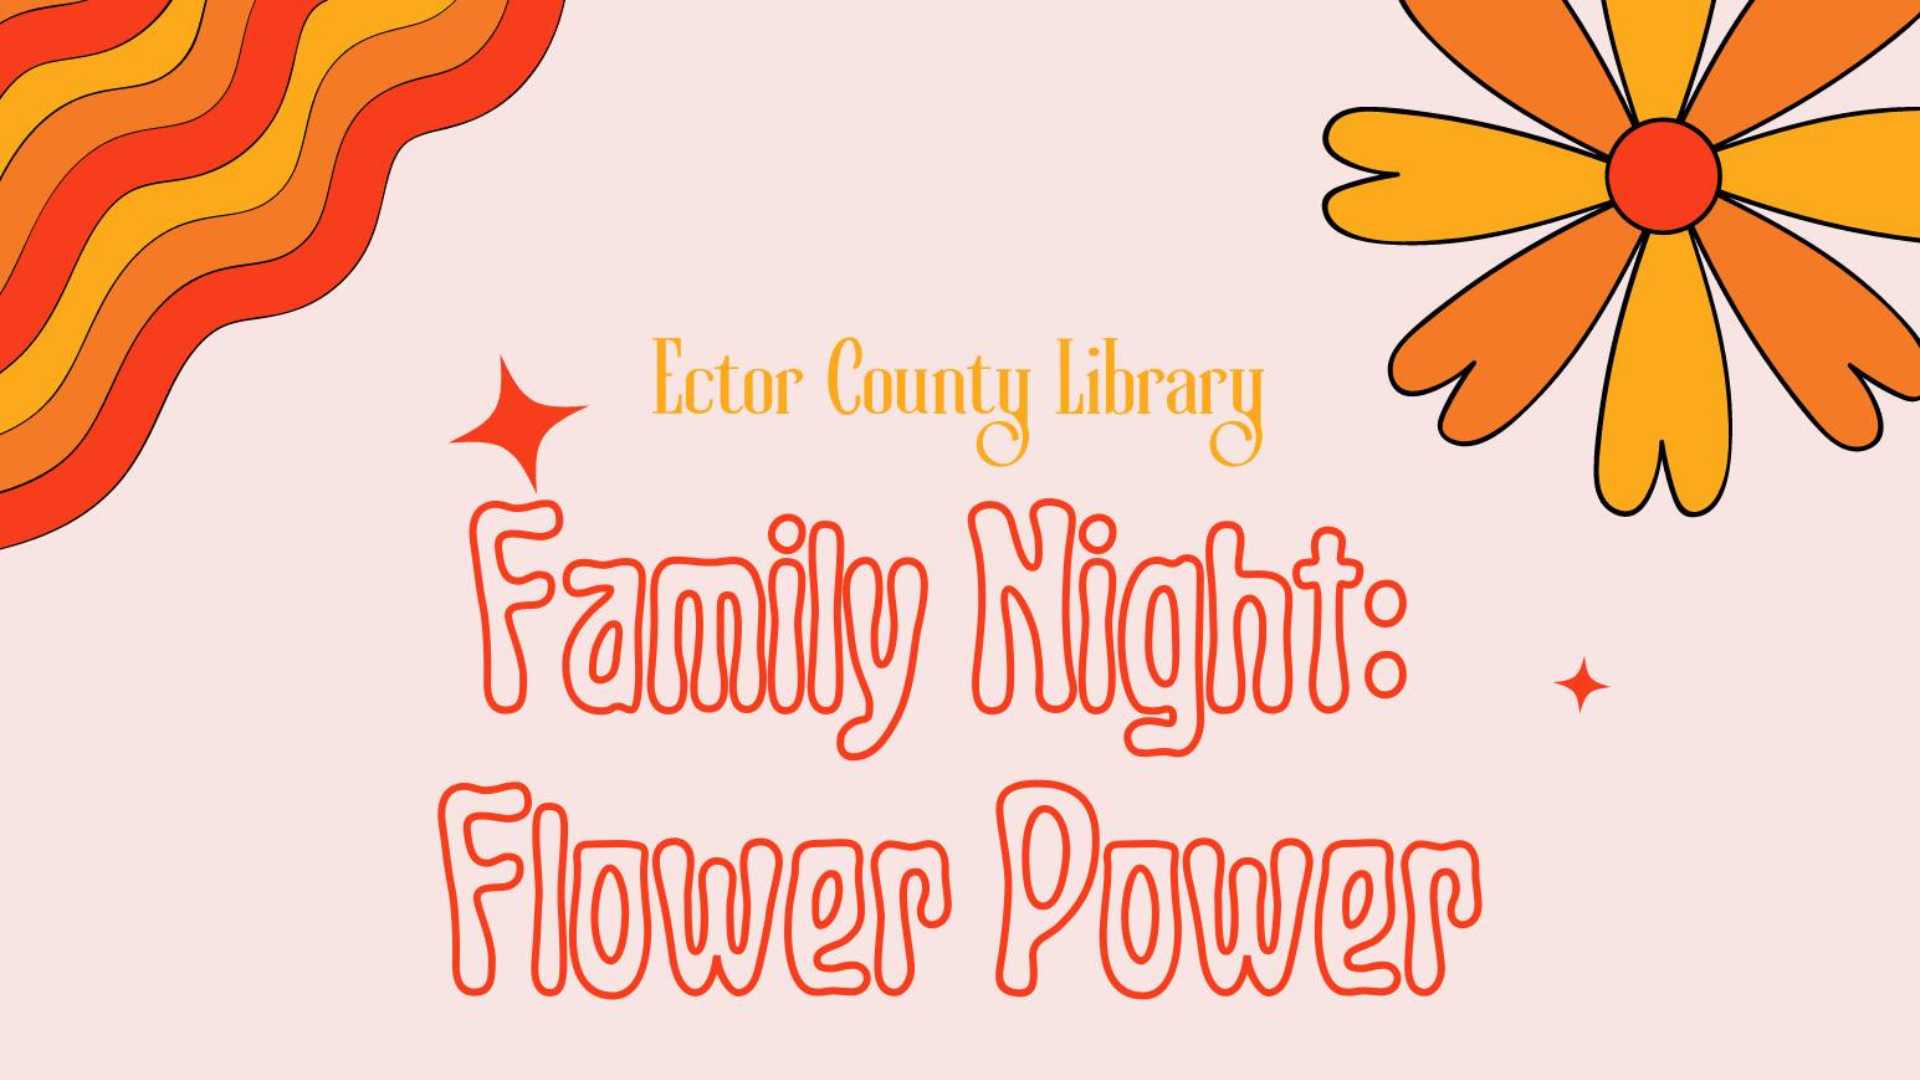 Family Night: Flower Power at the Ector County Library